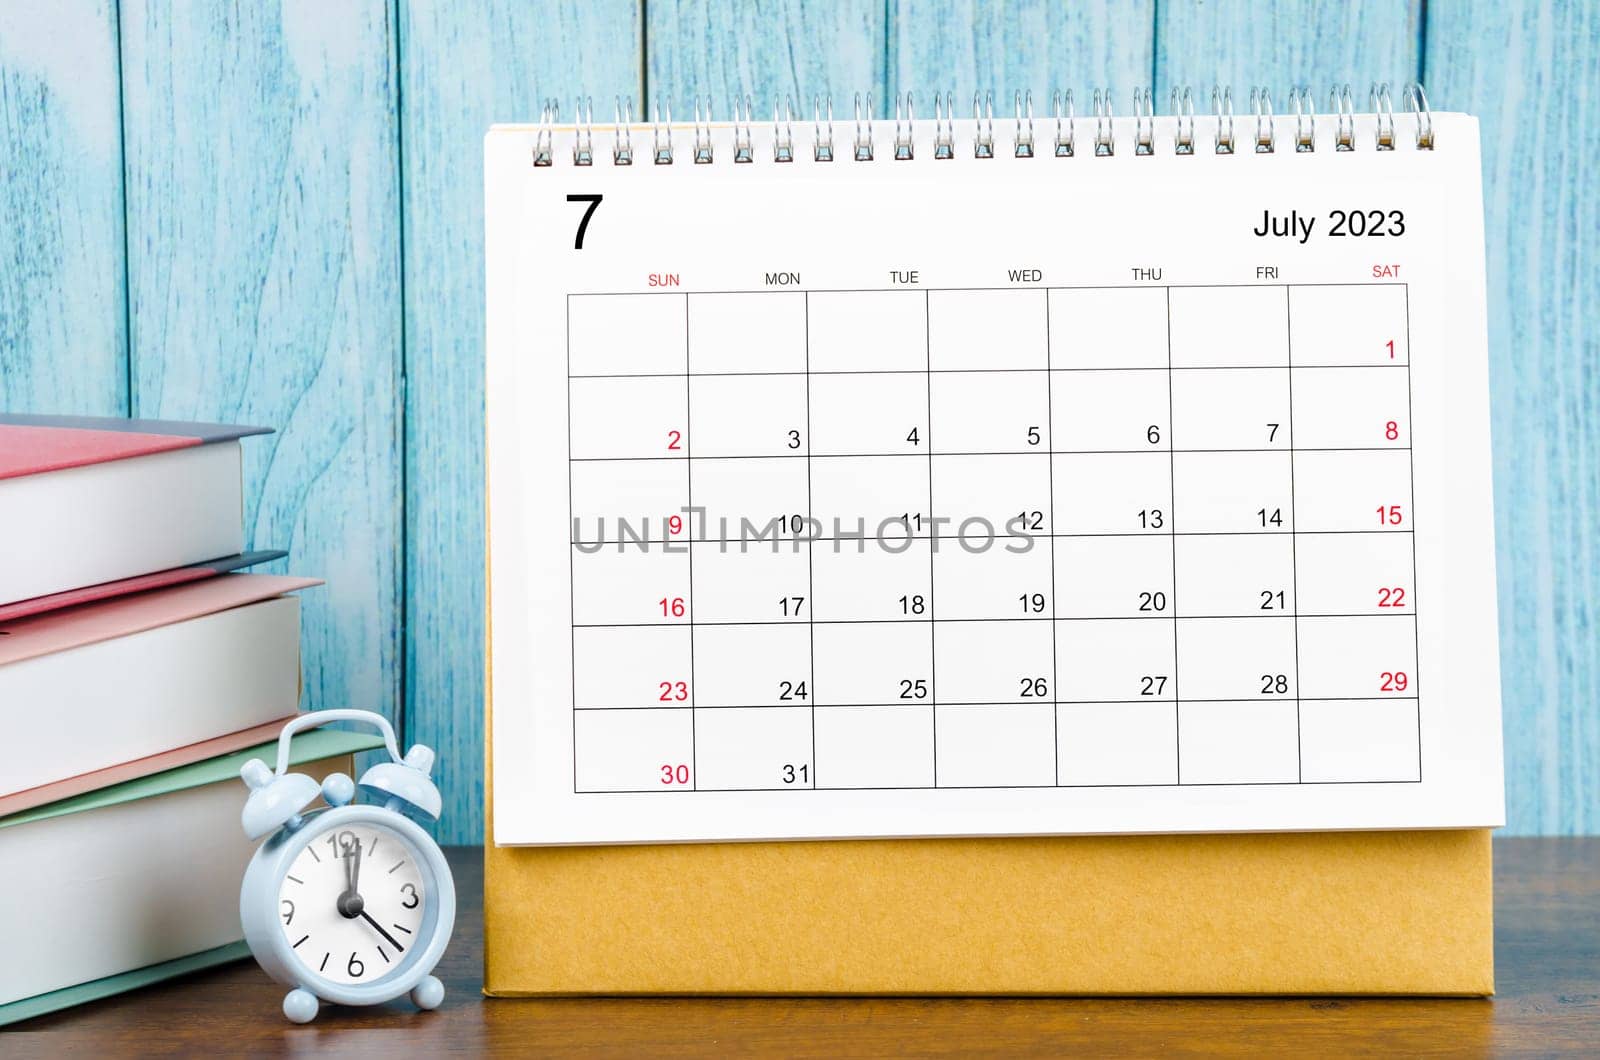 July 2023 Monthly desk calendar for the organizer to plan 2023 year with alarm clock and books on wooden table.